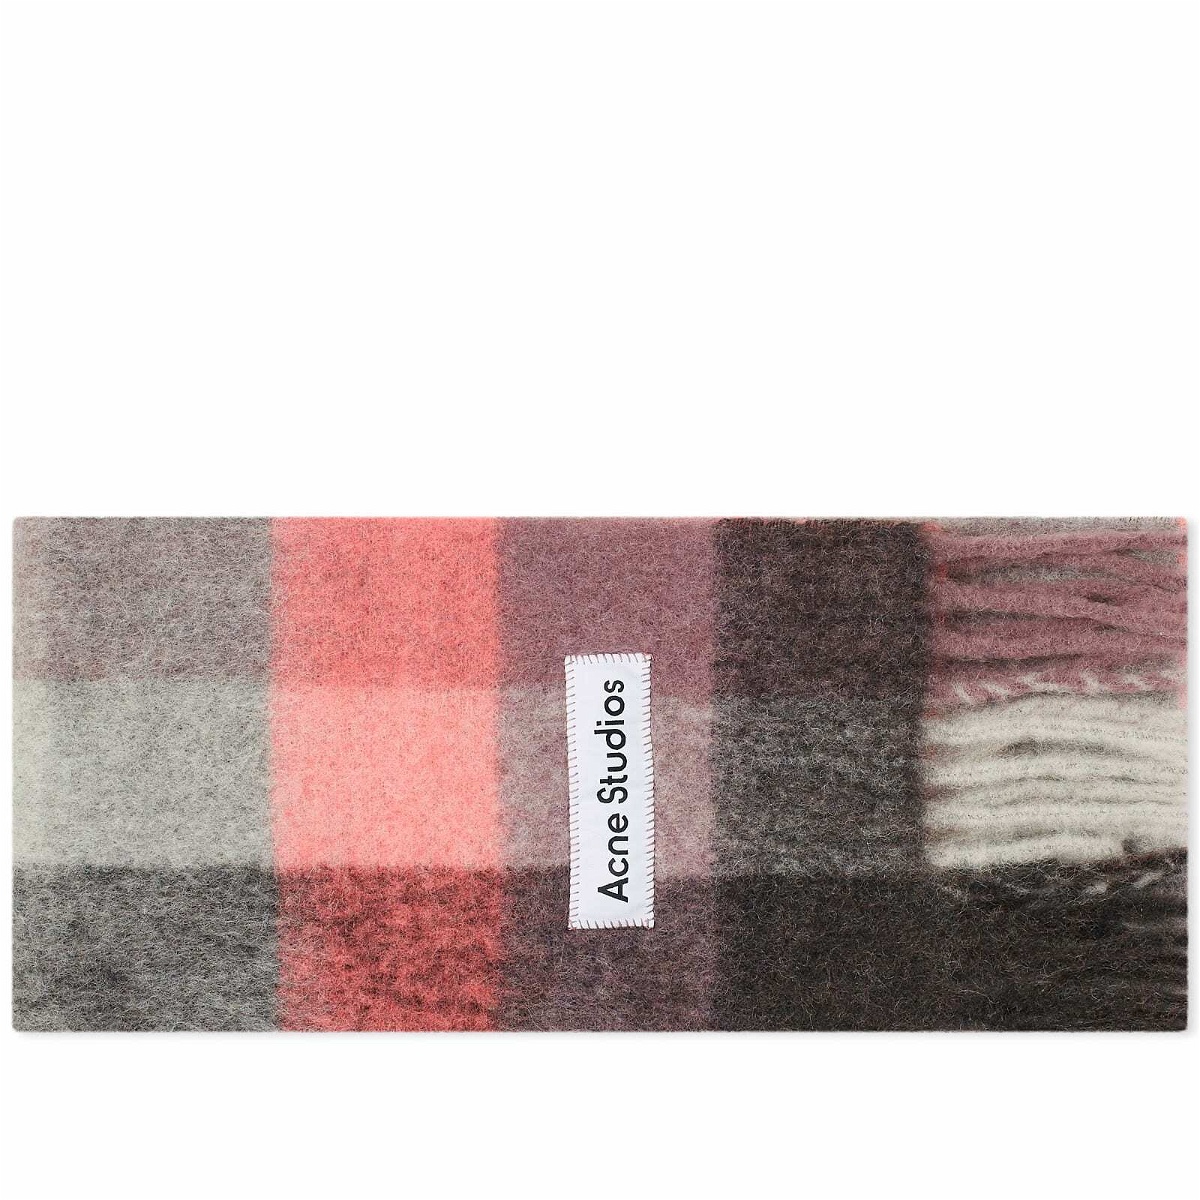 Photo: Acne Studios Men's Vally Check Scarf in Mauve/Bright Pink/Anthracite